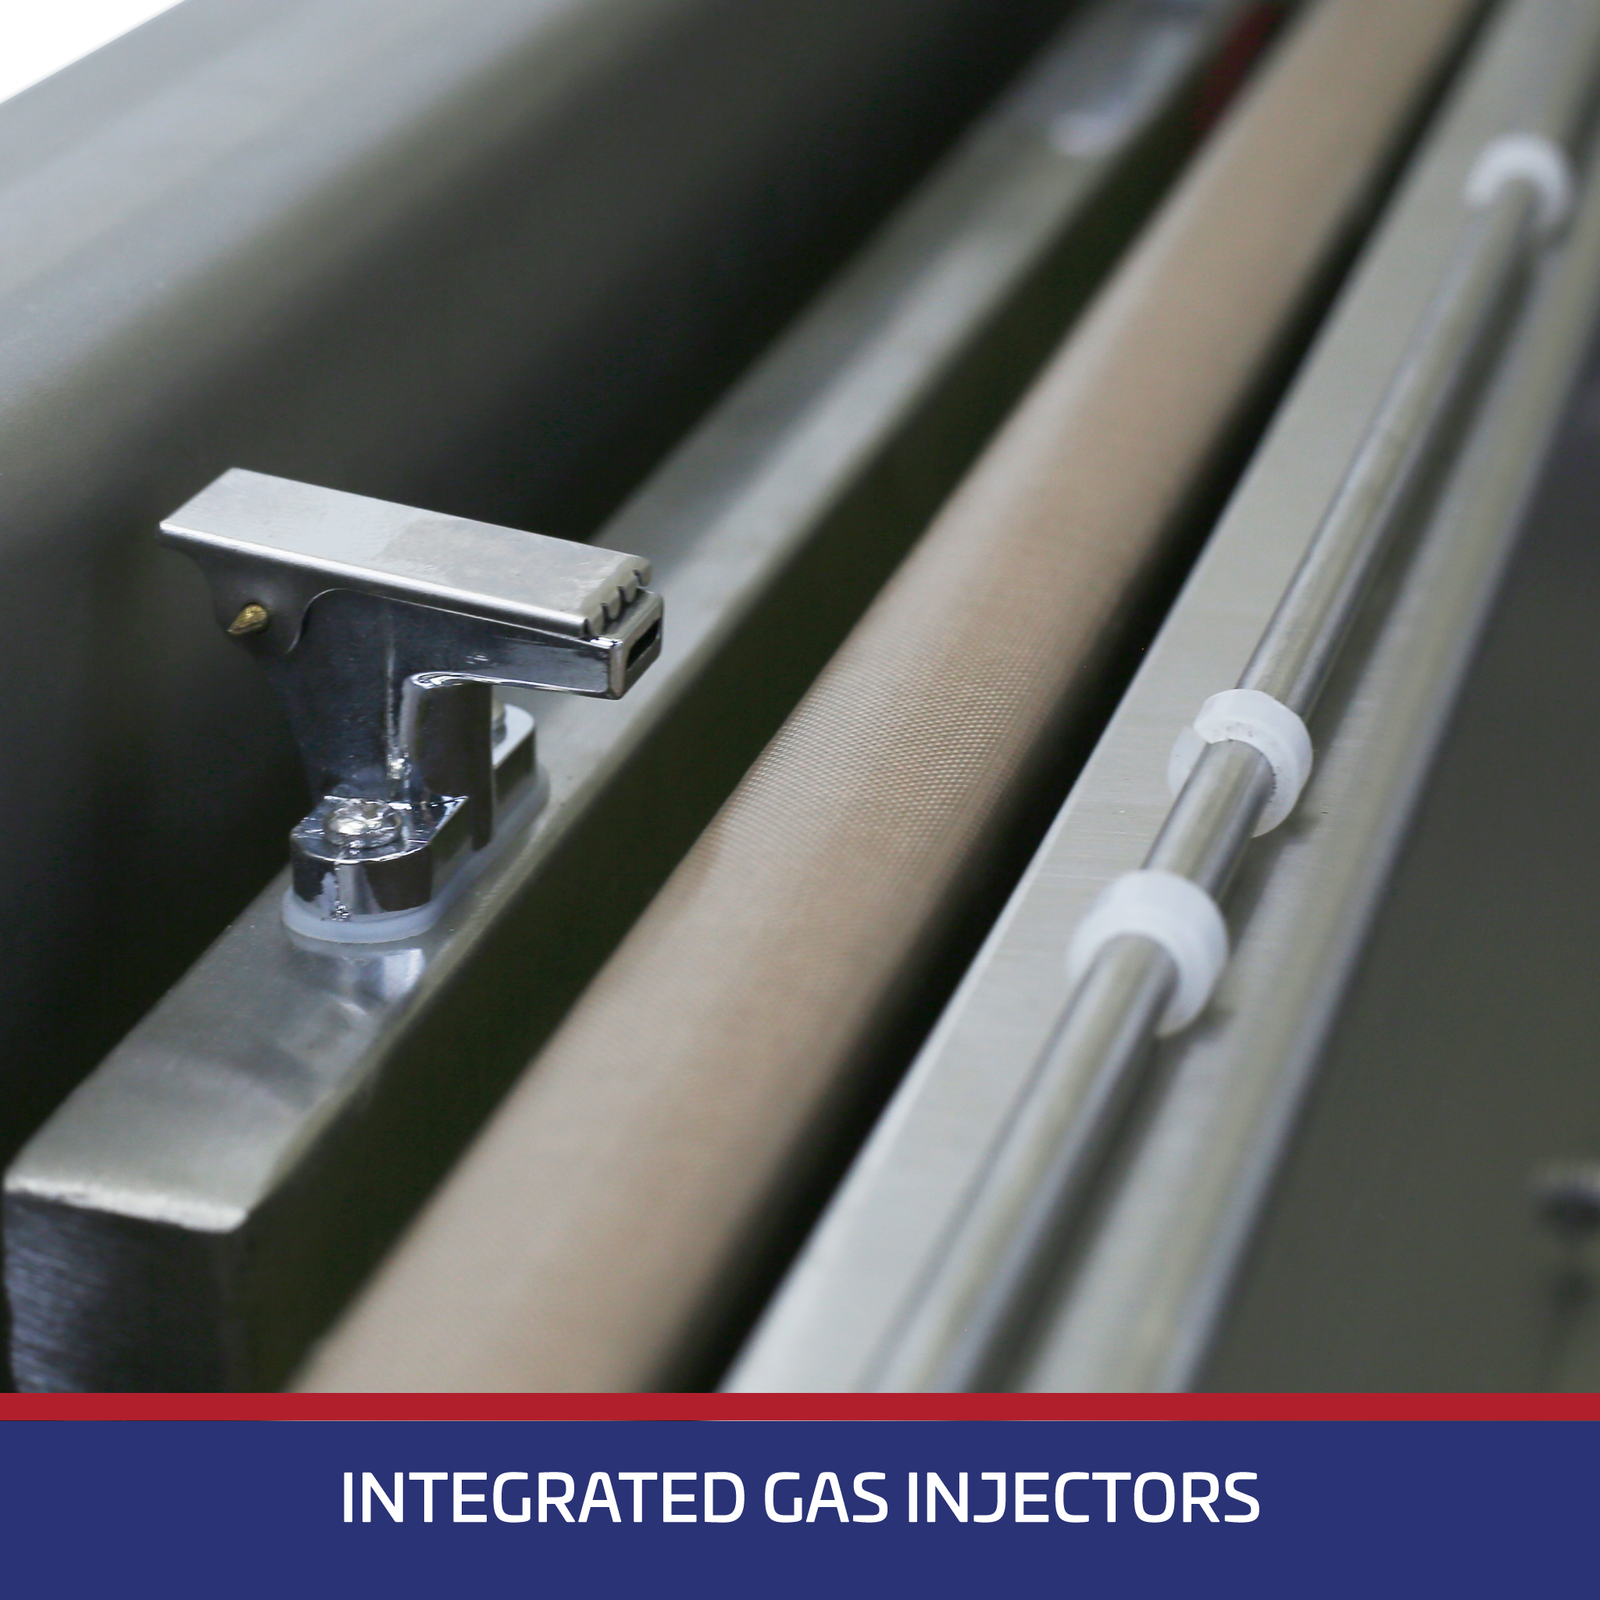 Close of the heating element and the integrated gas injector of the JORESTECH tabletop vacuum sealer. A blue banner reads Integrated gas injectors